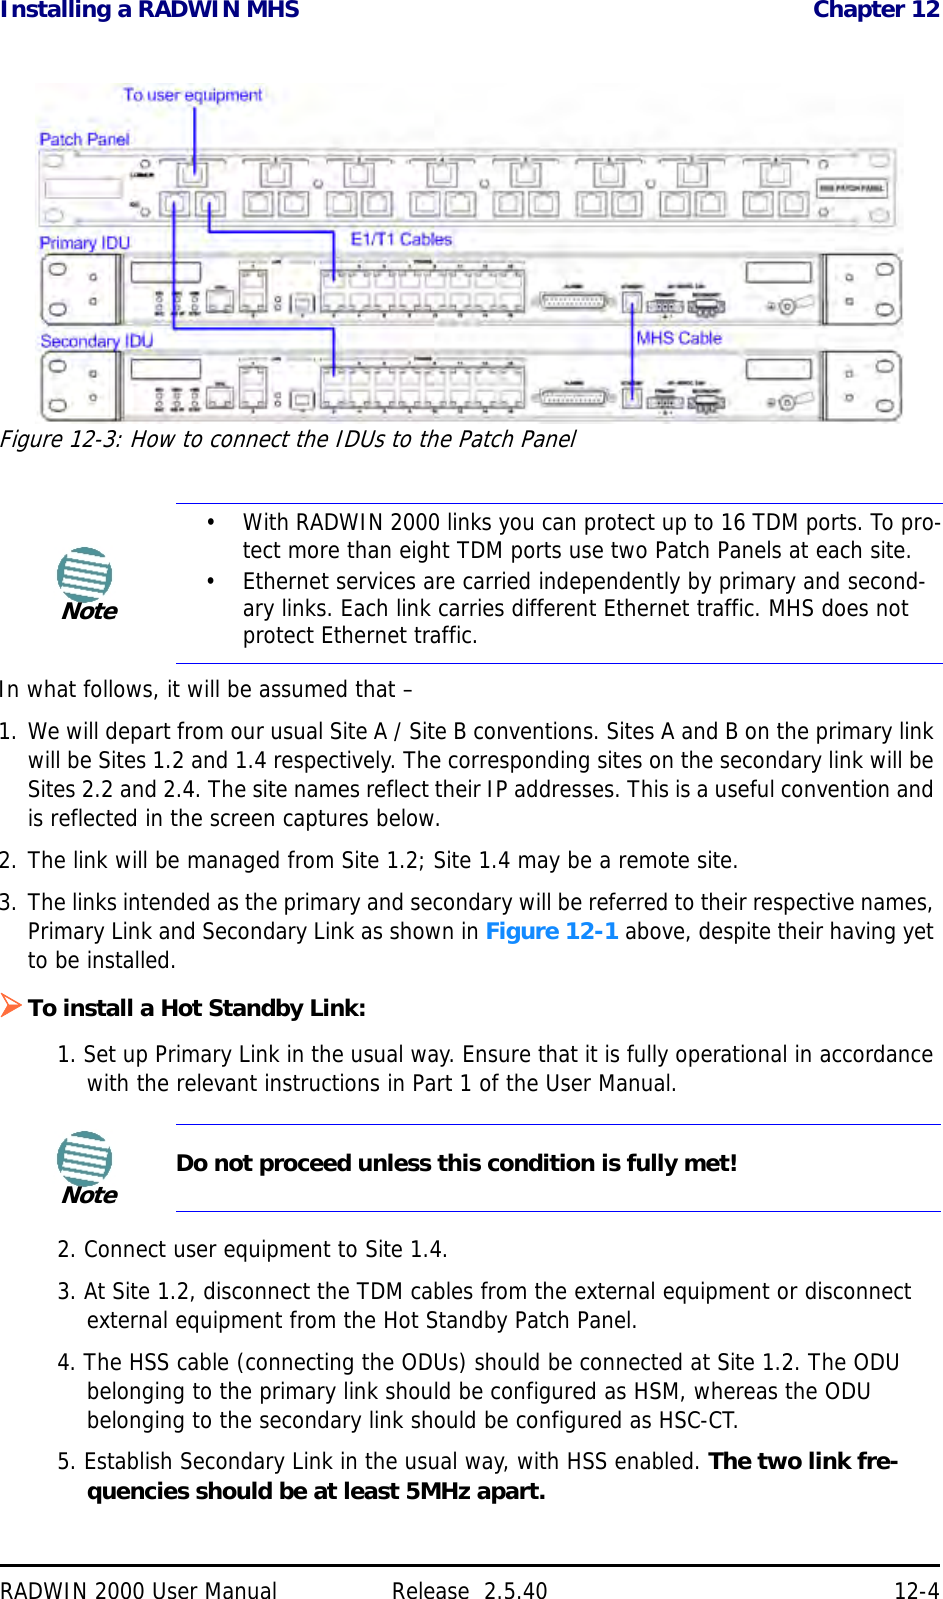 Installing a RADWIN MHS Chapter 12RADWIN 2000 User Manual Release  2.5.40 12-4Figure 12-3: How to connect the IDUs to the Patch PanelIn what follows, it will be assumed that – 1. We will depart from our usual Site A / Site B conventions. Sites A and B on the primary link will be Sites 1.2 and 1.4 respectively. The corresponding sites on the secondary link will be Sites 2.2 and 2.4. The site names reflect their IP addresses. This is a useful convention and is reflected in the screen captures below.2. The link will be managed from Site 1.2; Site 1.4 may be a remote site.3. The links intended as the primary and secondary will be referred to their respective names, Primary Link and Secondary Link as shown in Figure 12-1 above, despite their having yet to be installed.To install a Hot Standby Link:1. Set up Primary Link in the usual way. Ensure that it is fully operational in accordance with the relevant instructions in Part 1 of the User Manual.2. Connect user equipment to Site 1.4.3. At Site 1.2, disconnect the TDM cables from the external equipment or disconnect external equipment from the Hot Standby Patch Panel.4. The HSS cable (connecting the ODUs) should be connected at Site 1.2. The ODU belonging to the primary link should be configured as HSM, whereas the ODU belonging to the secondary link should be configured as HSC-CT.5. Establish Secondary Link in the usual way, with HSS enabled. The two link fre-quencies should be at least 5MHz apart.Note•With RADWIN 2000 links you can protect up to 16 TDM ports. To pro-tect more than eight TDM ports use two Patch Panels at each site.• Ethernet services are carried independently by primary and second-ary links. Each link carries different Ethernet traffic. MHS does not protect Ethernet traffic.NoteDo not proceed unless this condition is fully met!